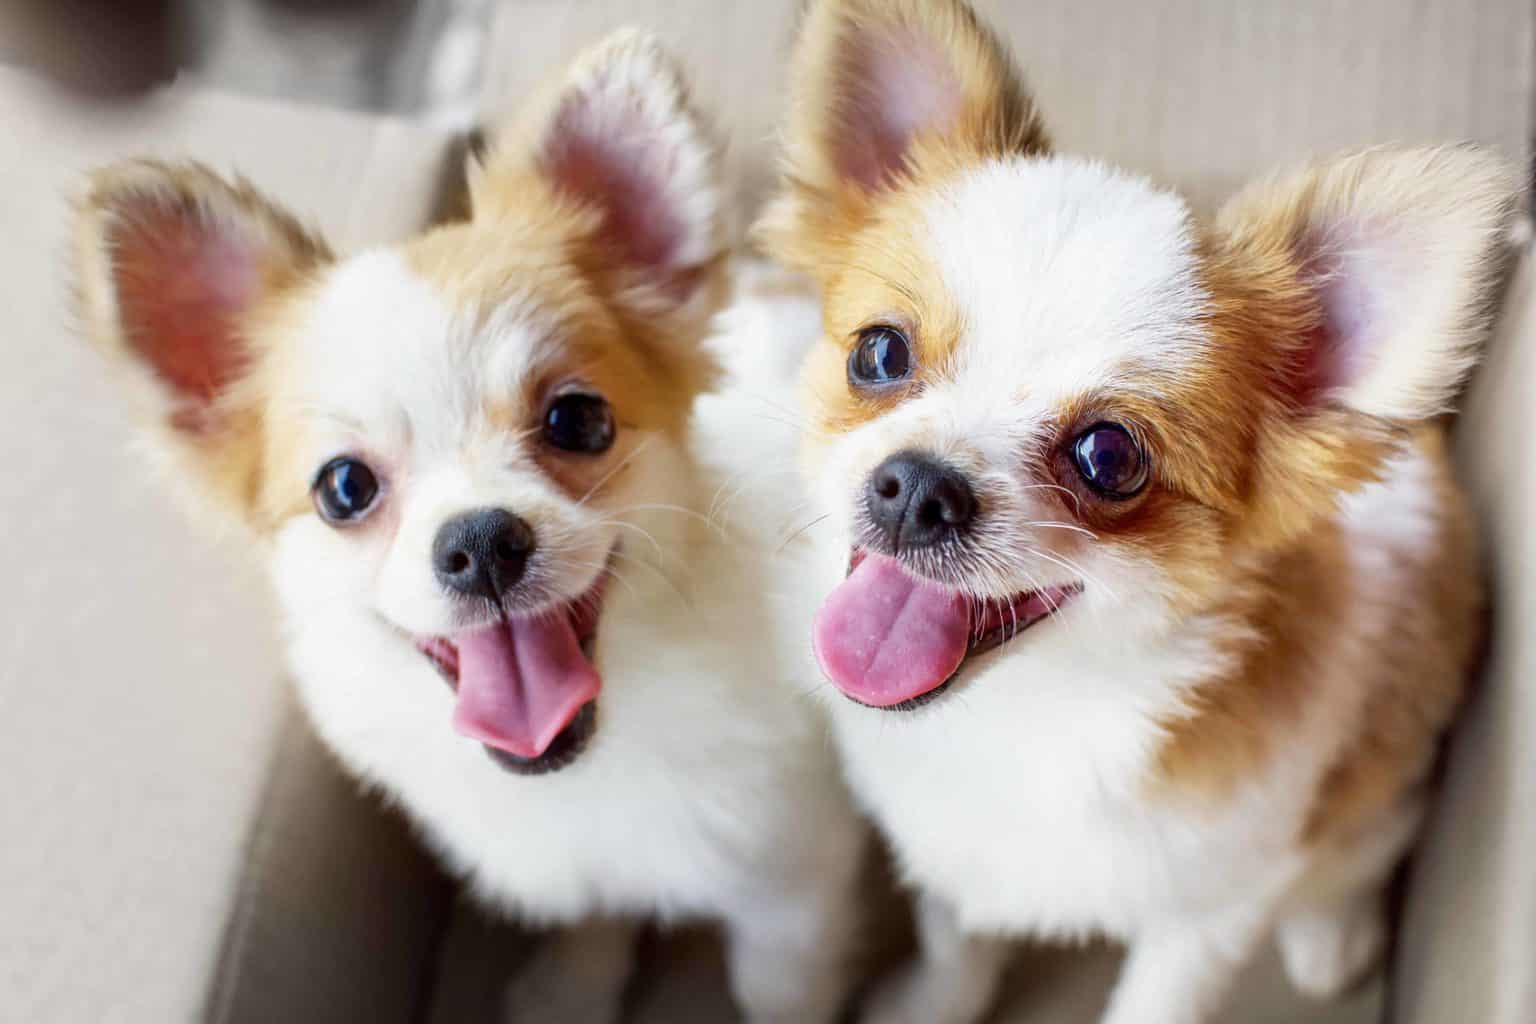 Pair of happy chihuahua puppies. There are numerous facts that people do not know about dogs including their sense of time, ability to smell emotions and ability to dream.